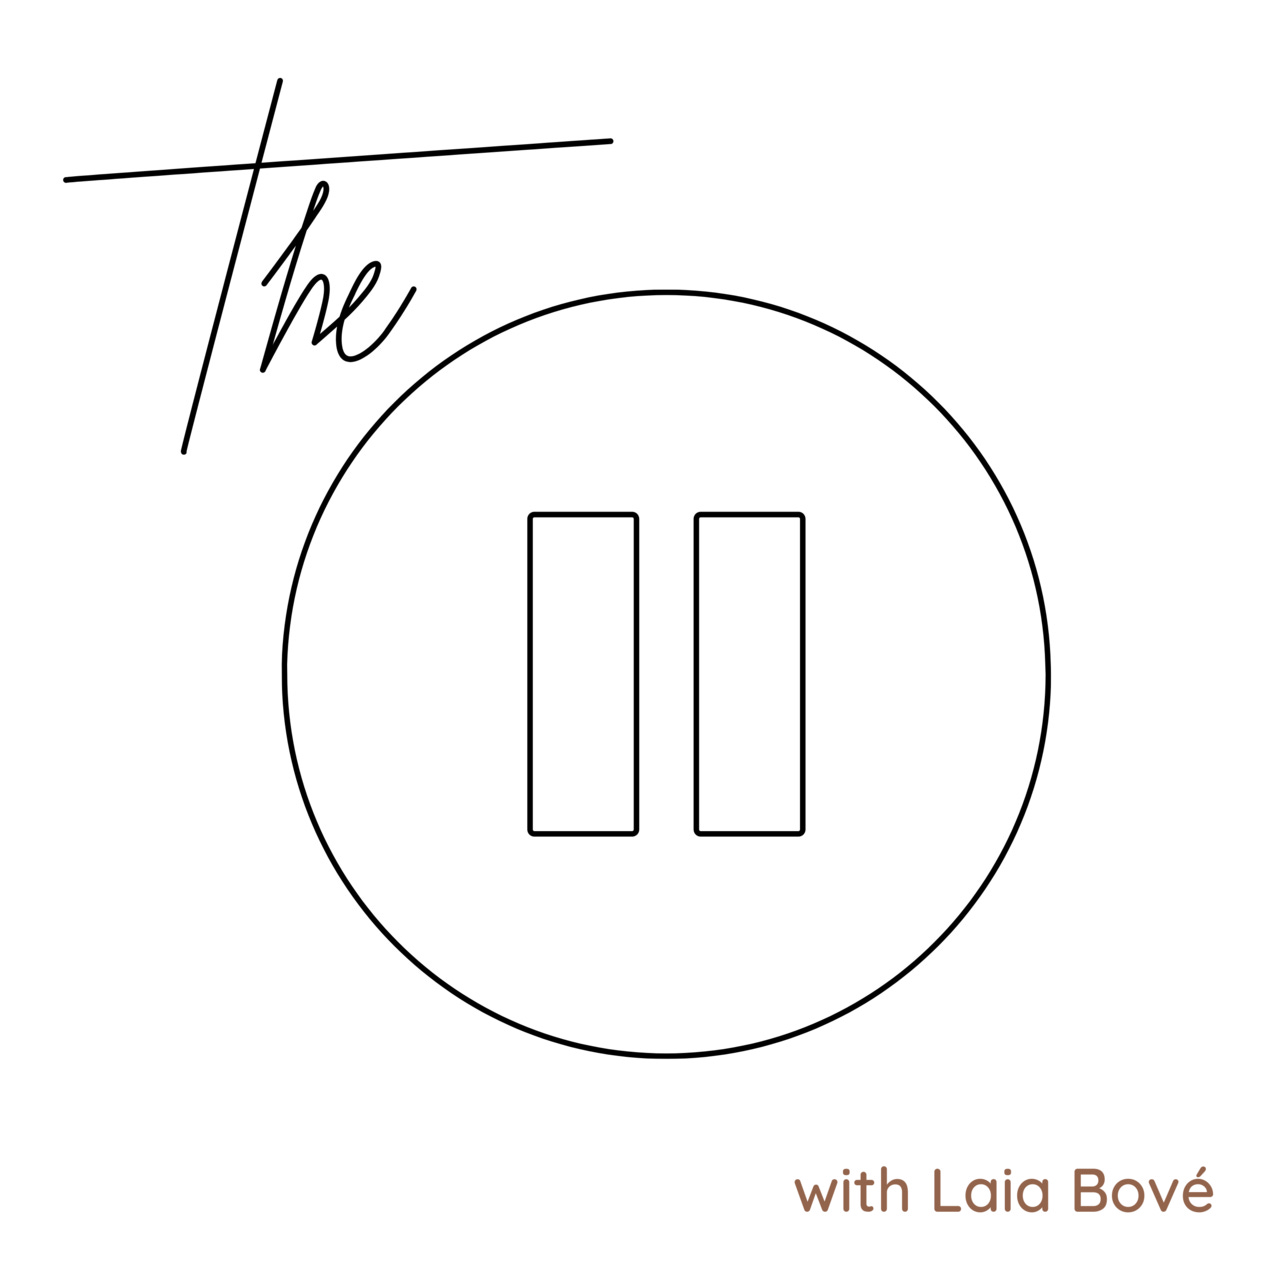 Artwork for The Pause by Laia Bové